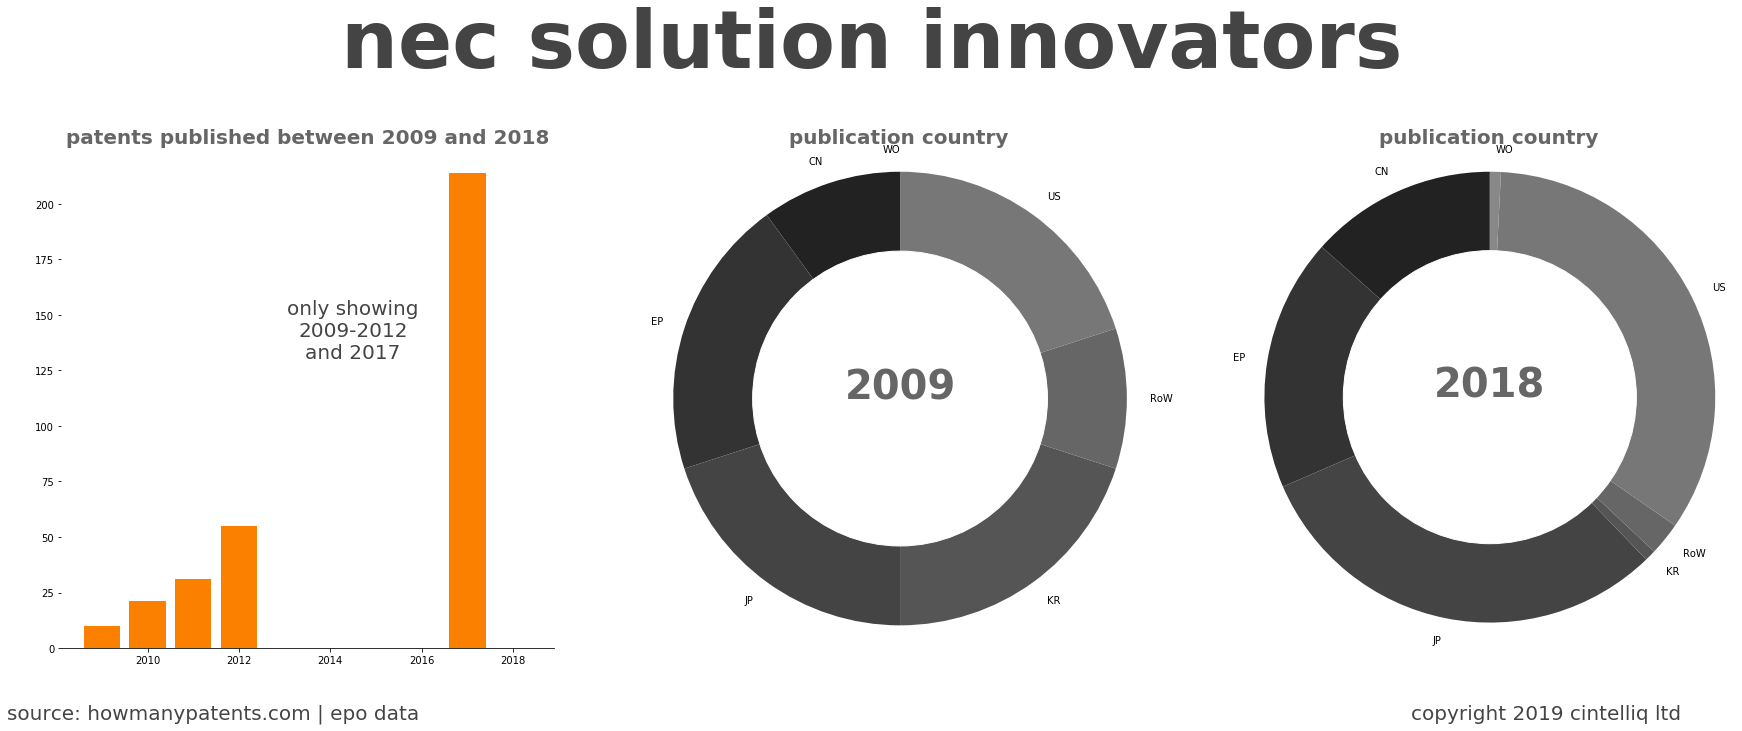 summary of patents for Nec Solution Innovators